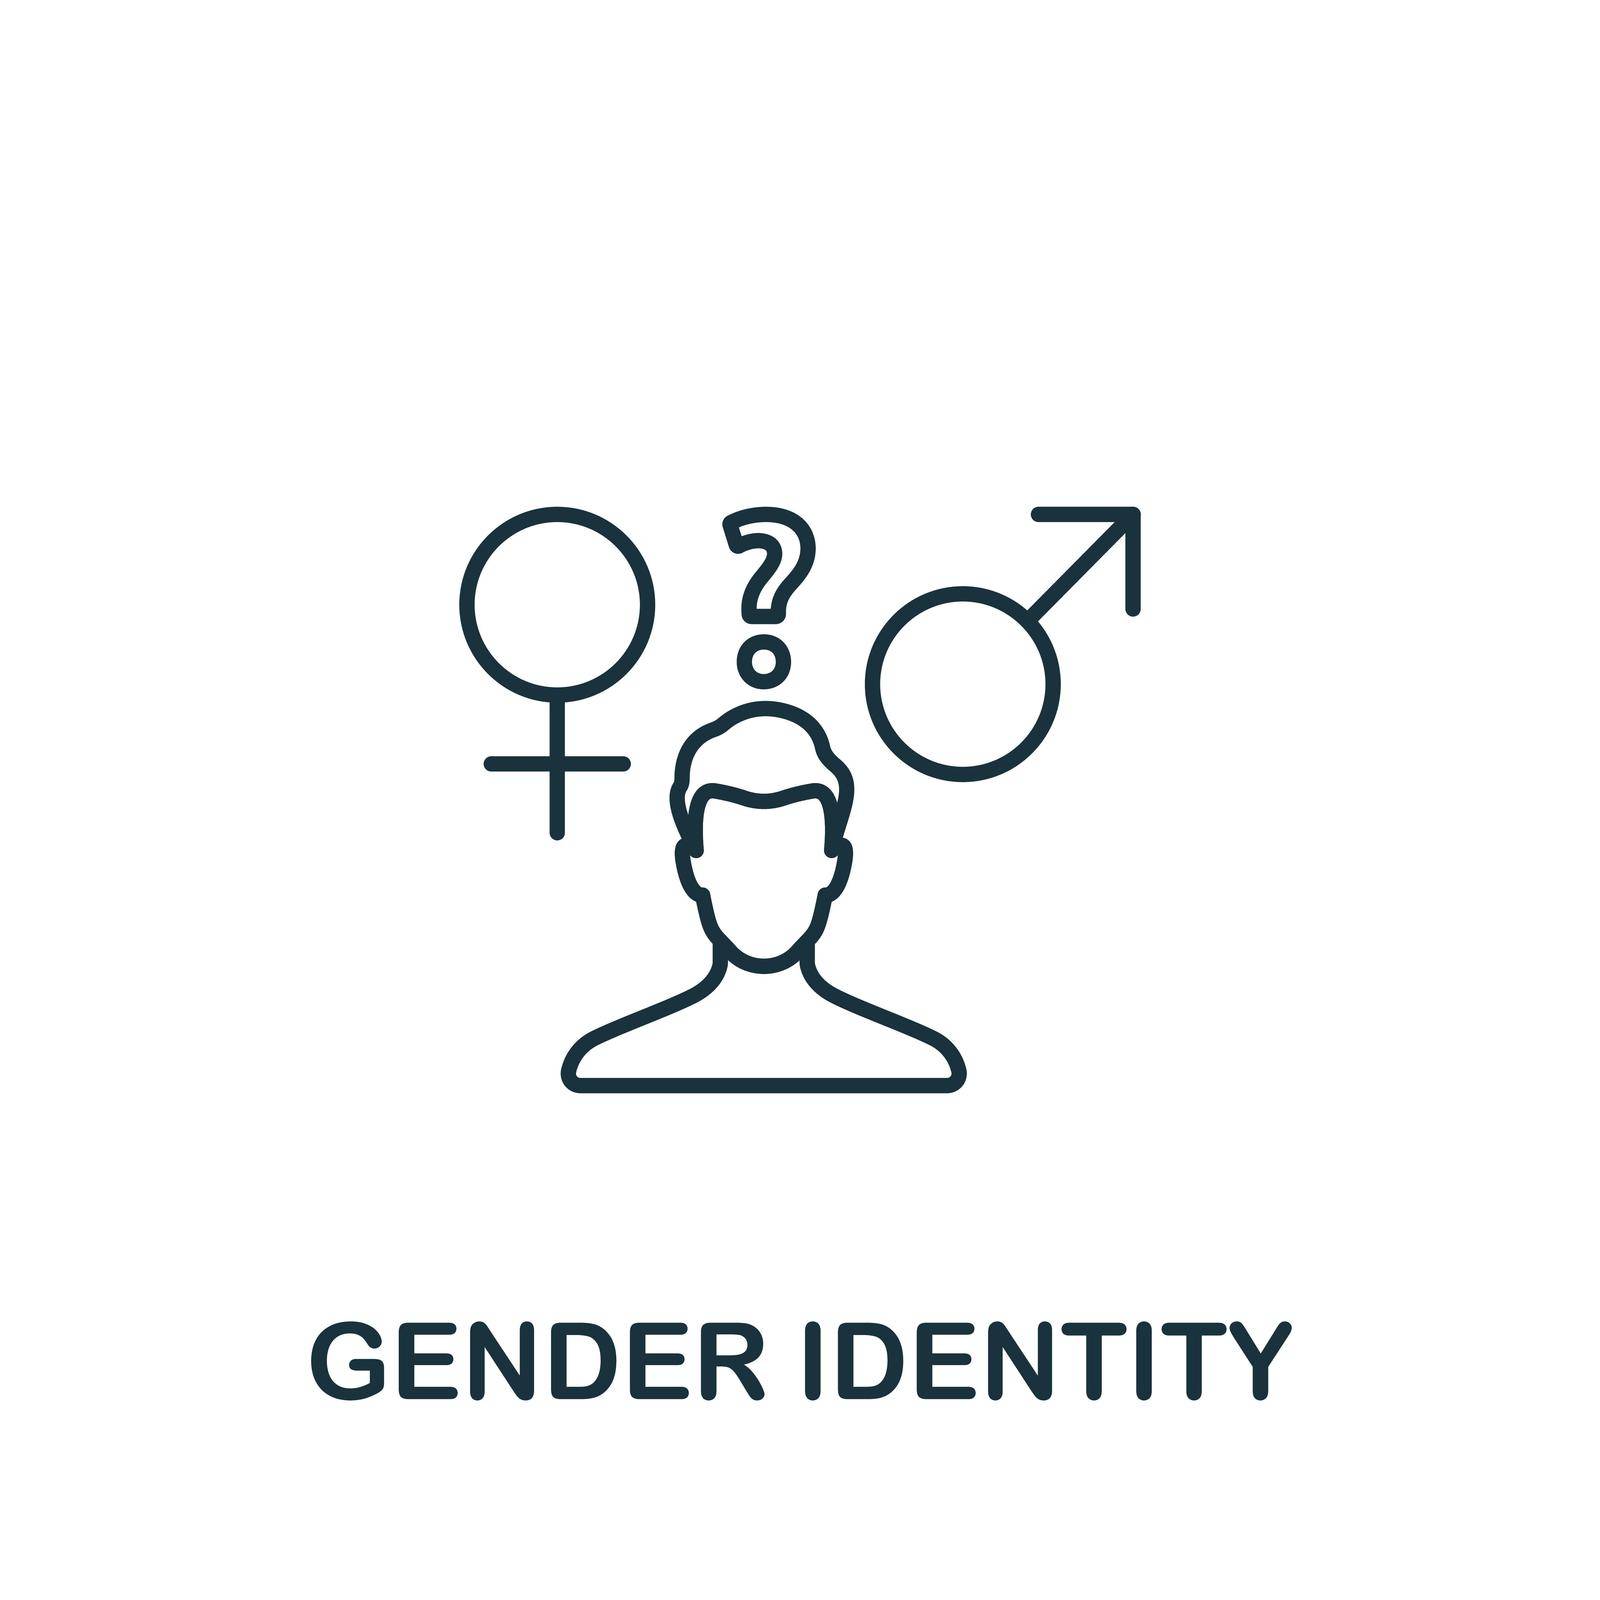 Gender Identity icon. Simple line element lgbt symbol for templates, web design and infographics.